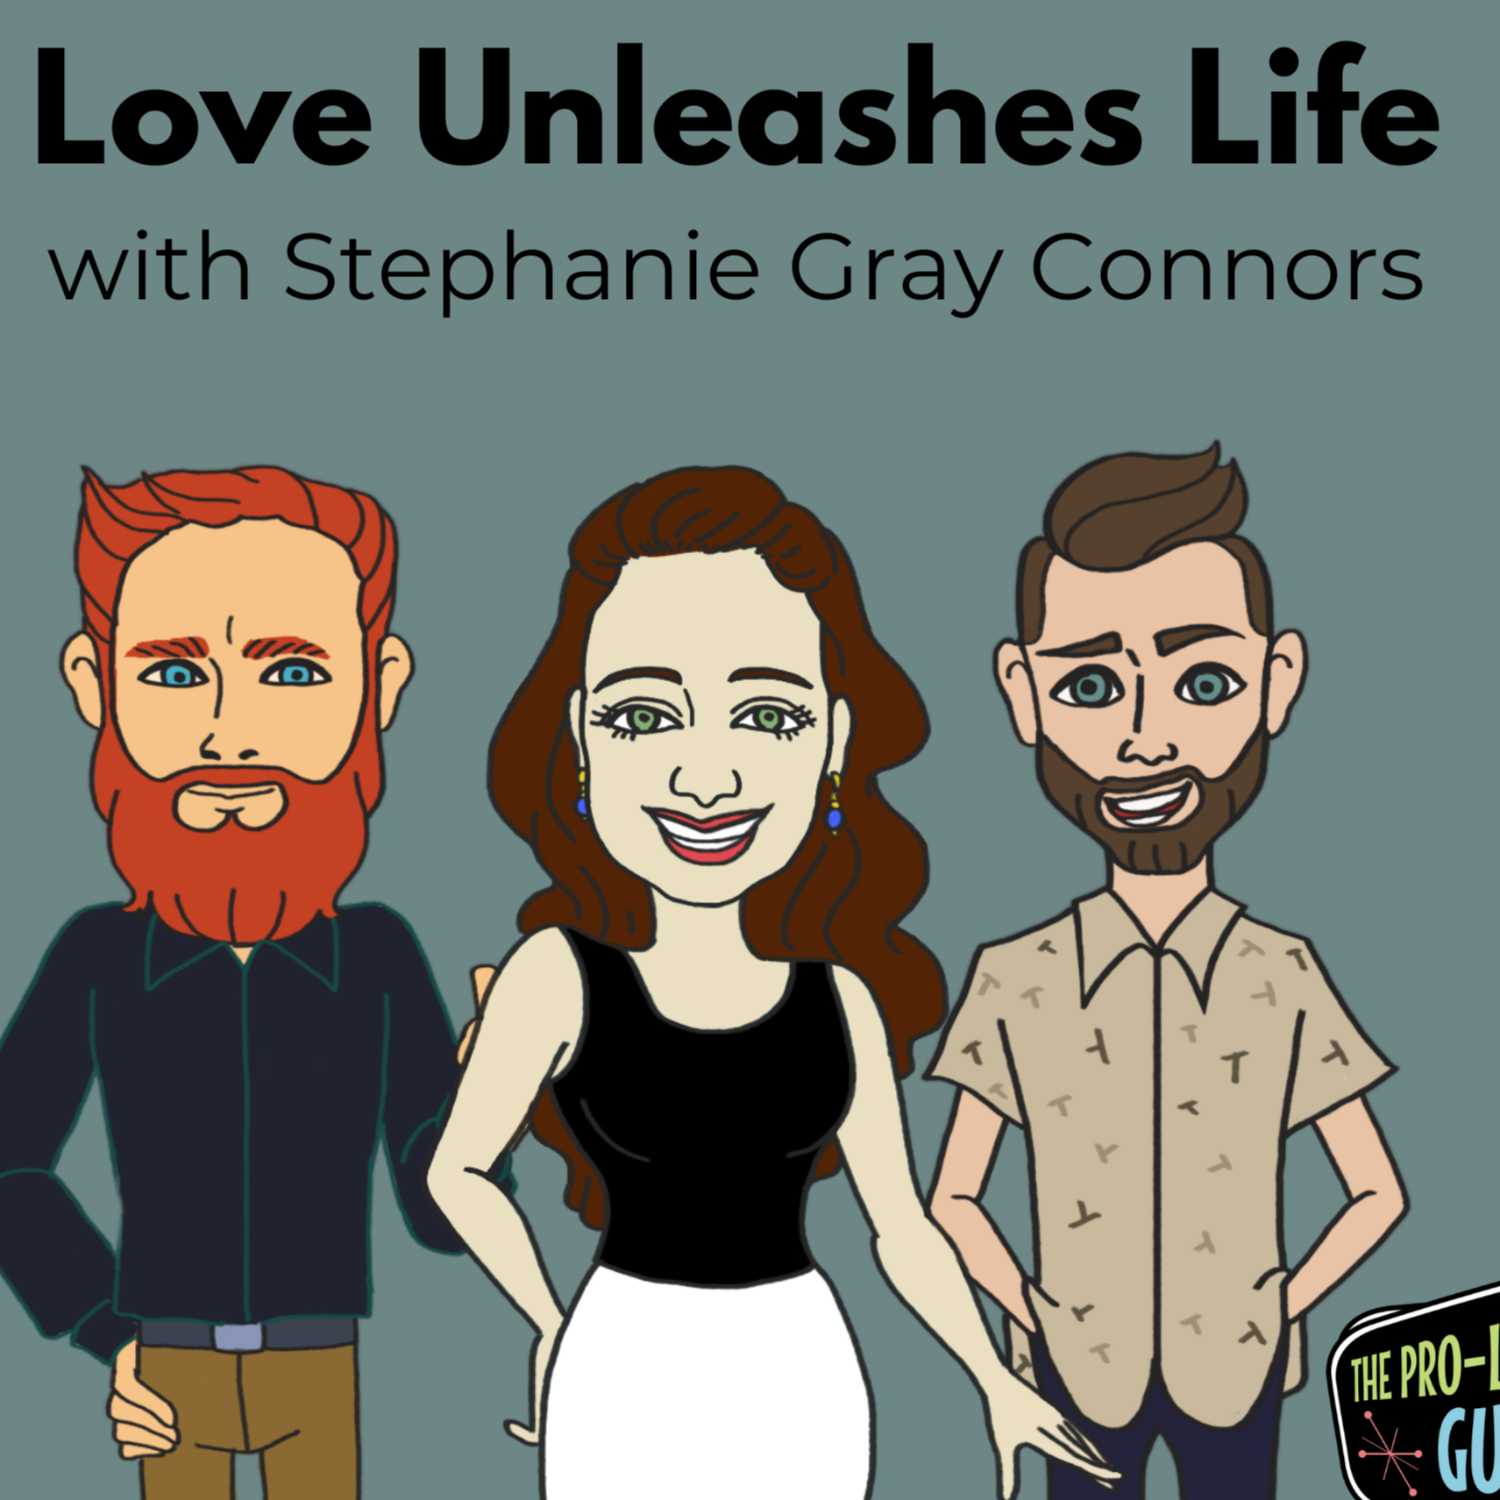 25: Love Unleashes Life | Stephanie Gray Connors